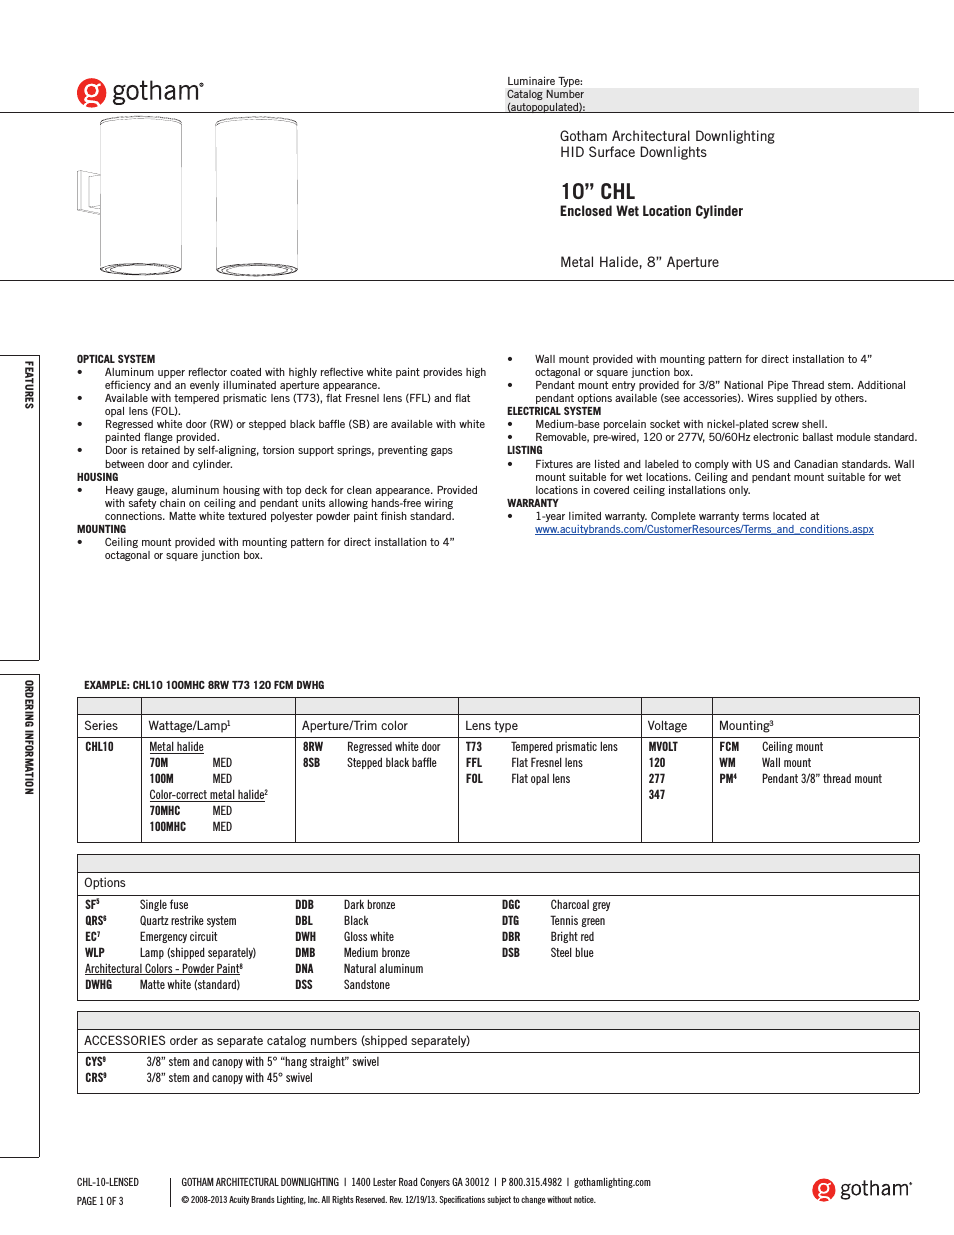 10 CHL Enclosed Wet Location Cylinder SpecSheet